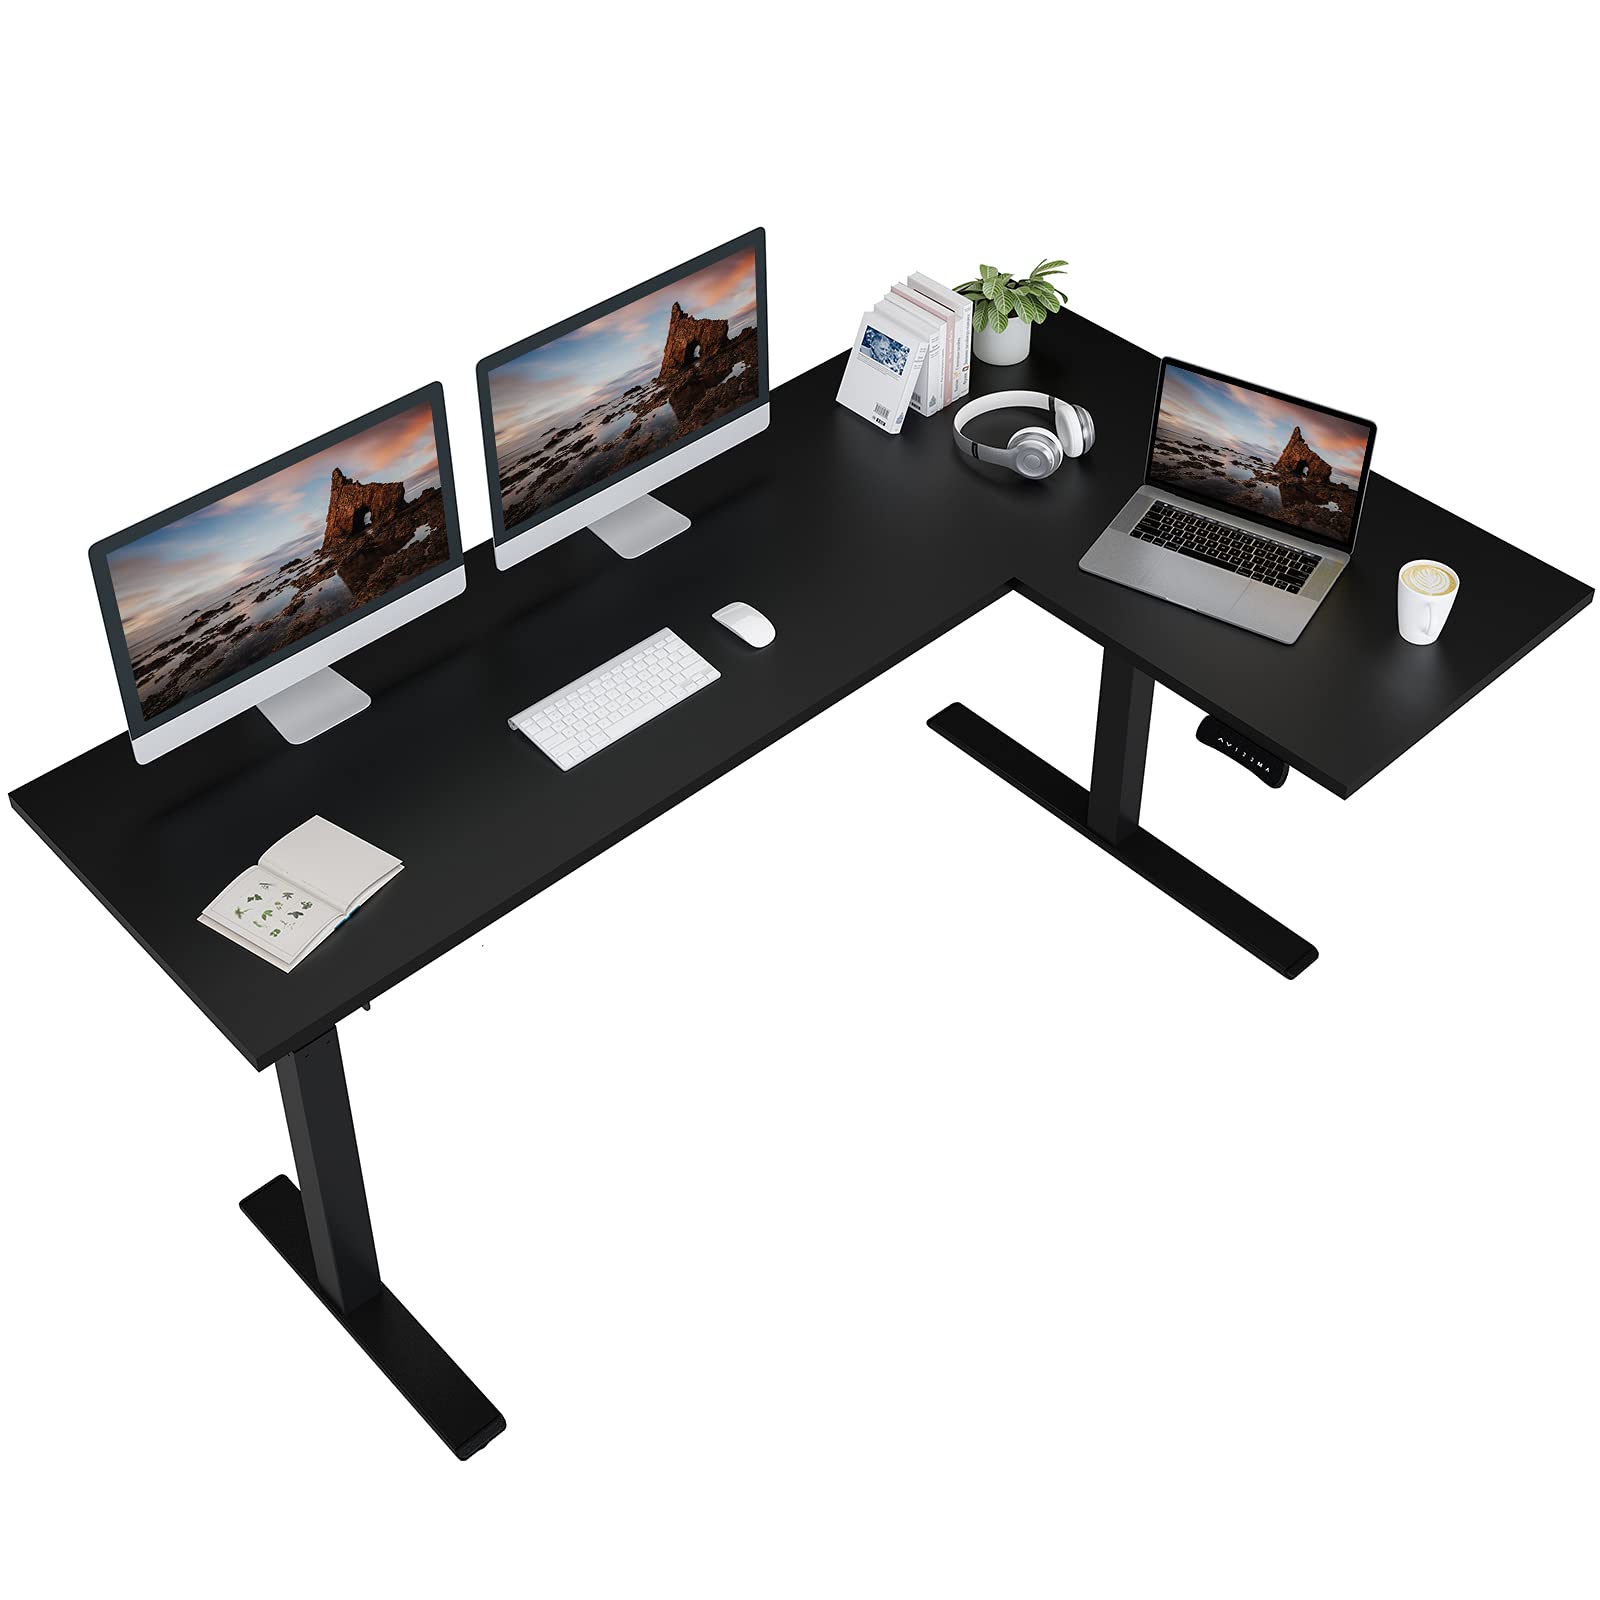 FLEXISPOT Pro L Shaped Desk Dual Motor Electric Standing Desk Sit Stand Up Desk Height Adjustable Desk Home Office Table with Splice Board, 71x48 B...